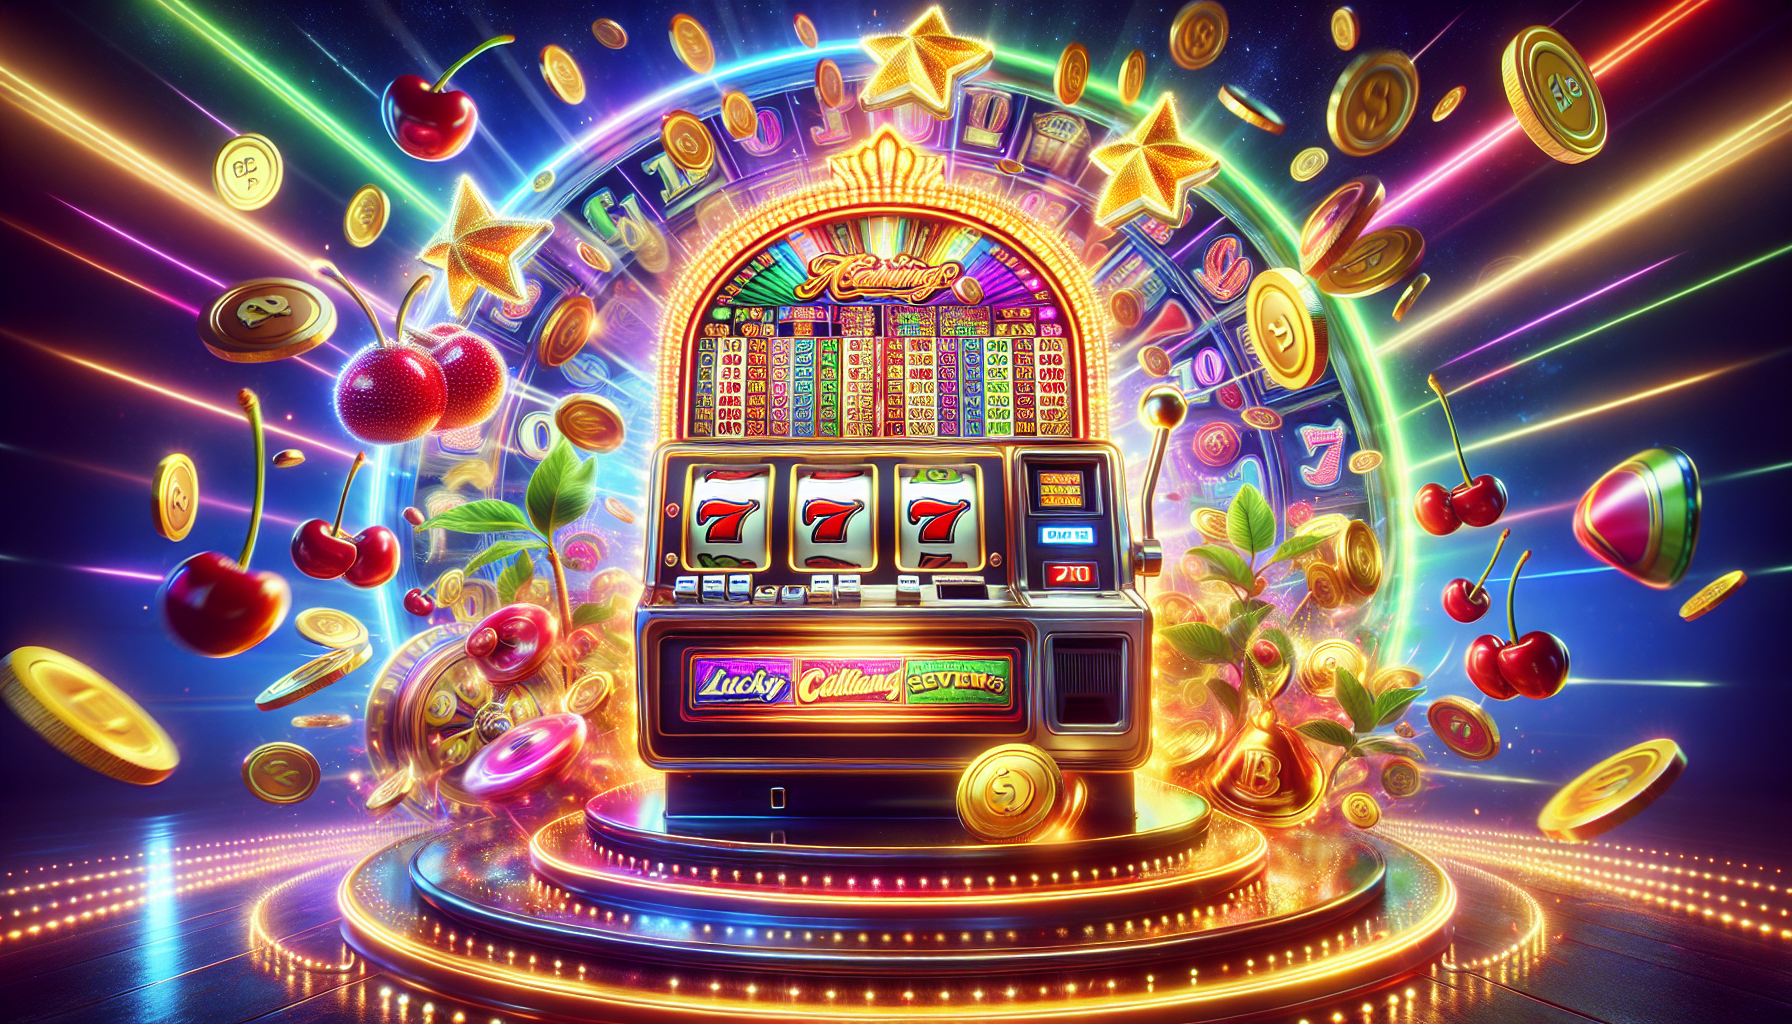 Can You Win On Slots With 20 Dollars?